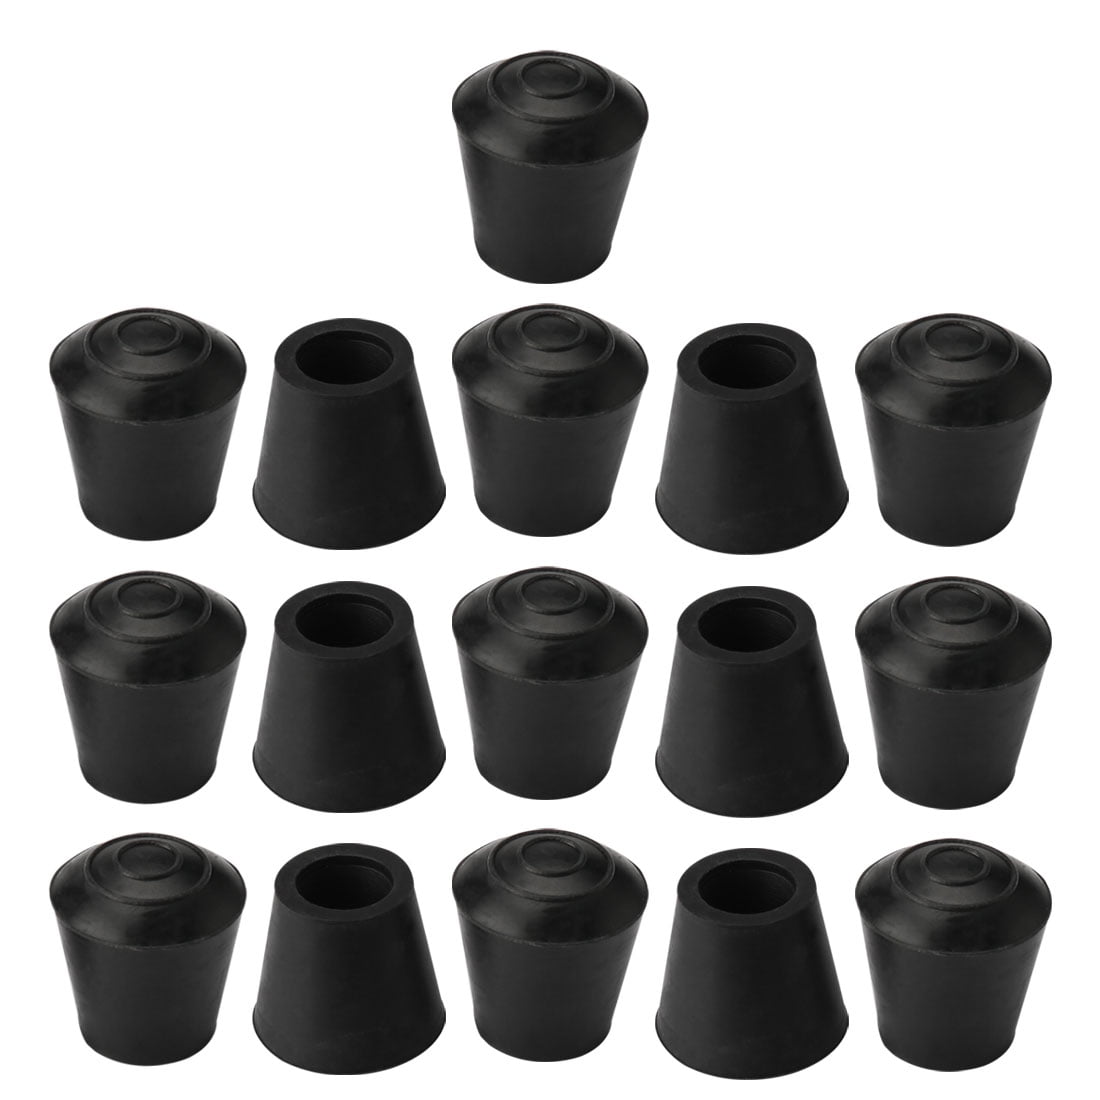 uxcell® 15pcs Chair Leg Tips Caps 16mm 5/8 Inch Anti Slip Rubber Furniture Table Feet Cover Floor Protector Reduce Noise Prevent Scratches 